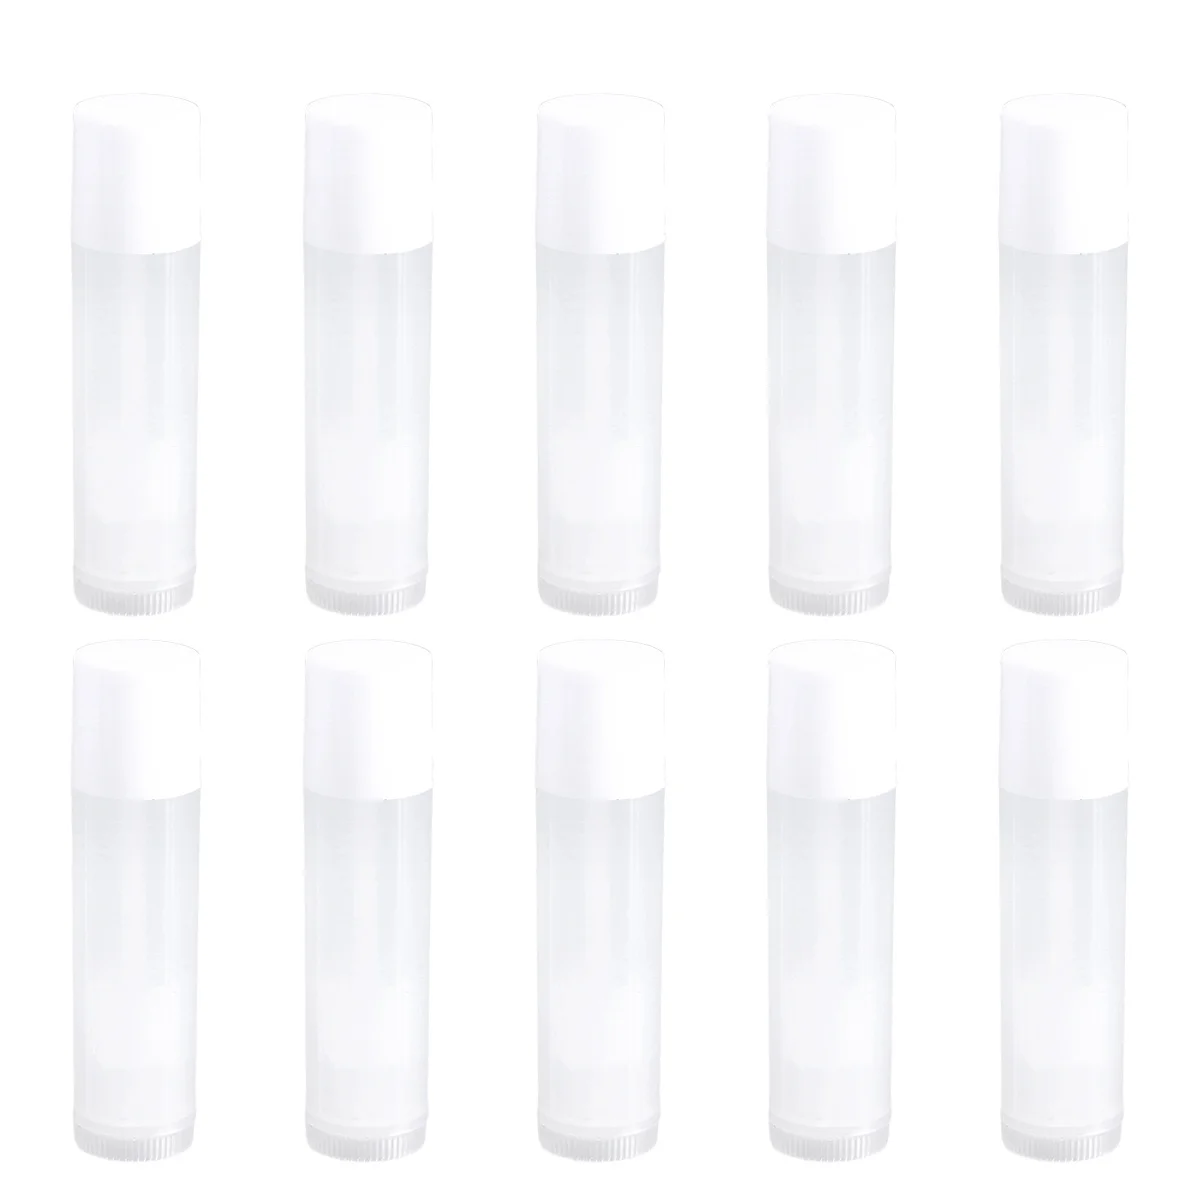 

50 Pcs Lipstick Container Tubes Containers Lids Lipstick Tube Holder Chapstick Containers Bulk Empty Lip Gloss Tubes